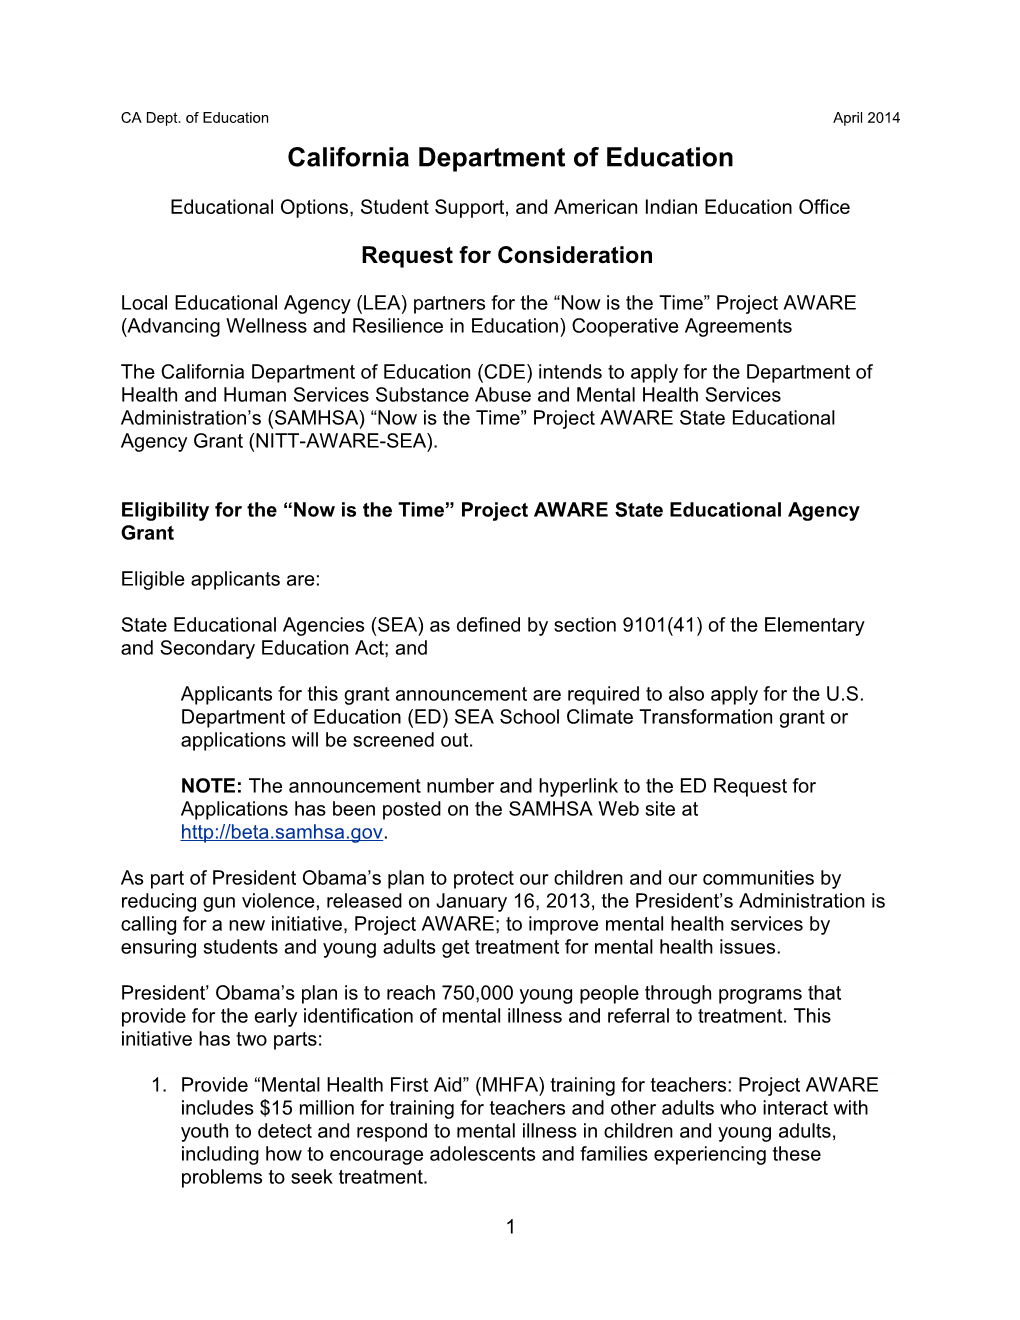 Request for Consideration - Letters (CA Dept of Education)